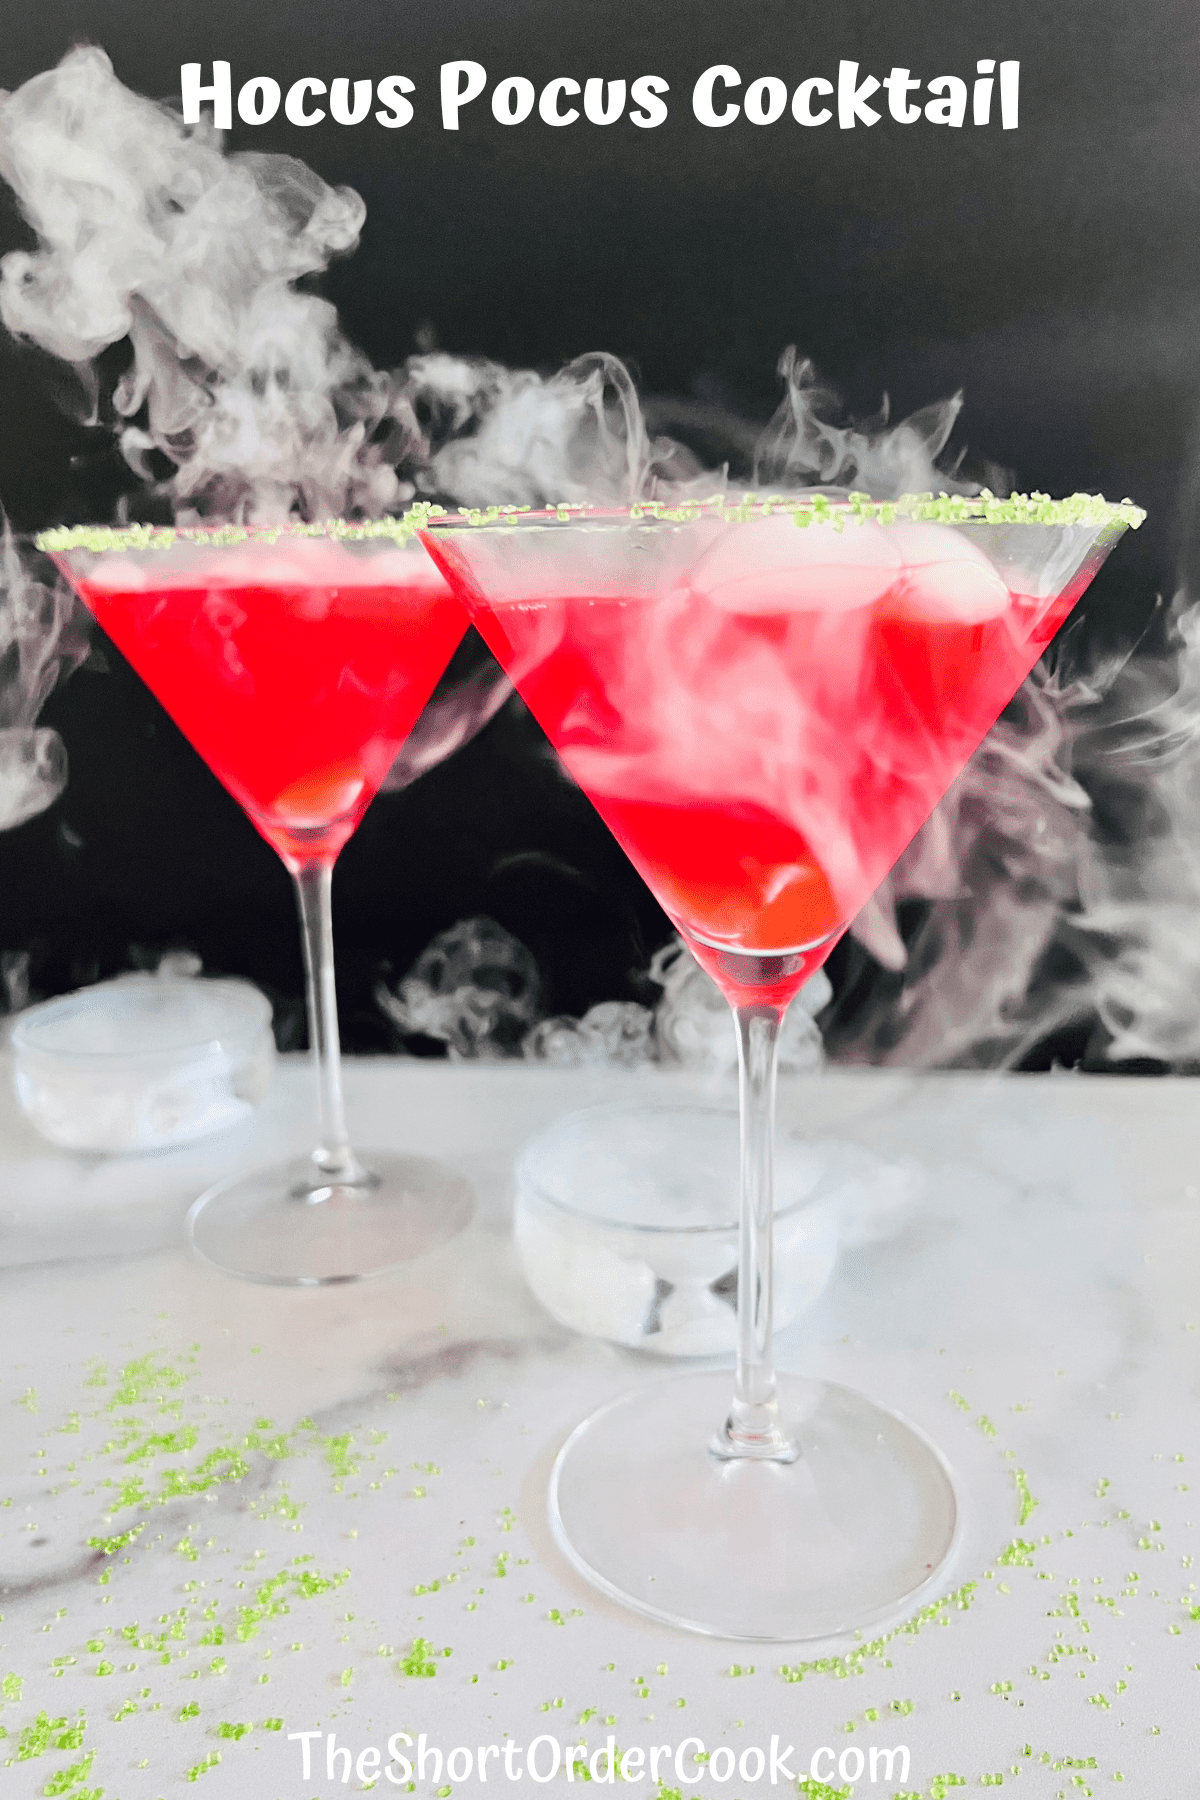 Two martini glasses filled with red hocus pocus cocktail with smoke coming from each.